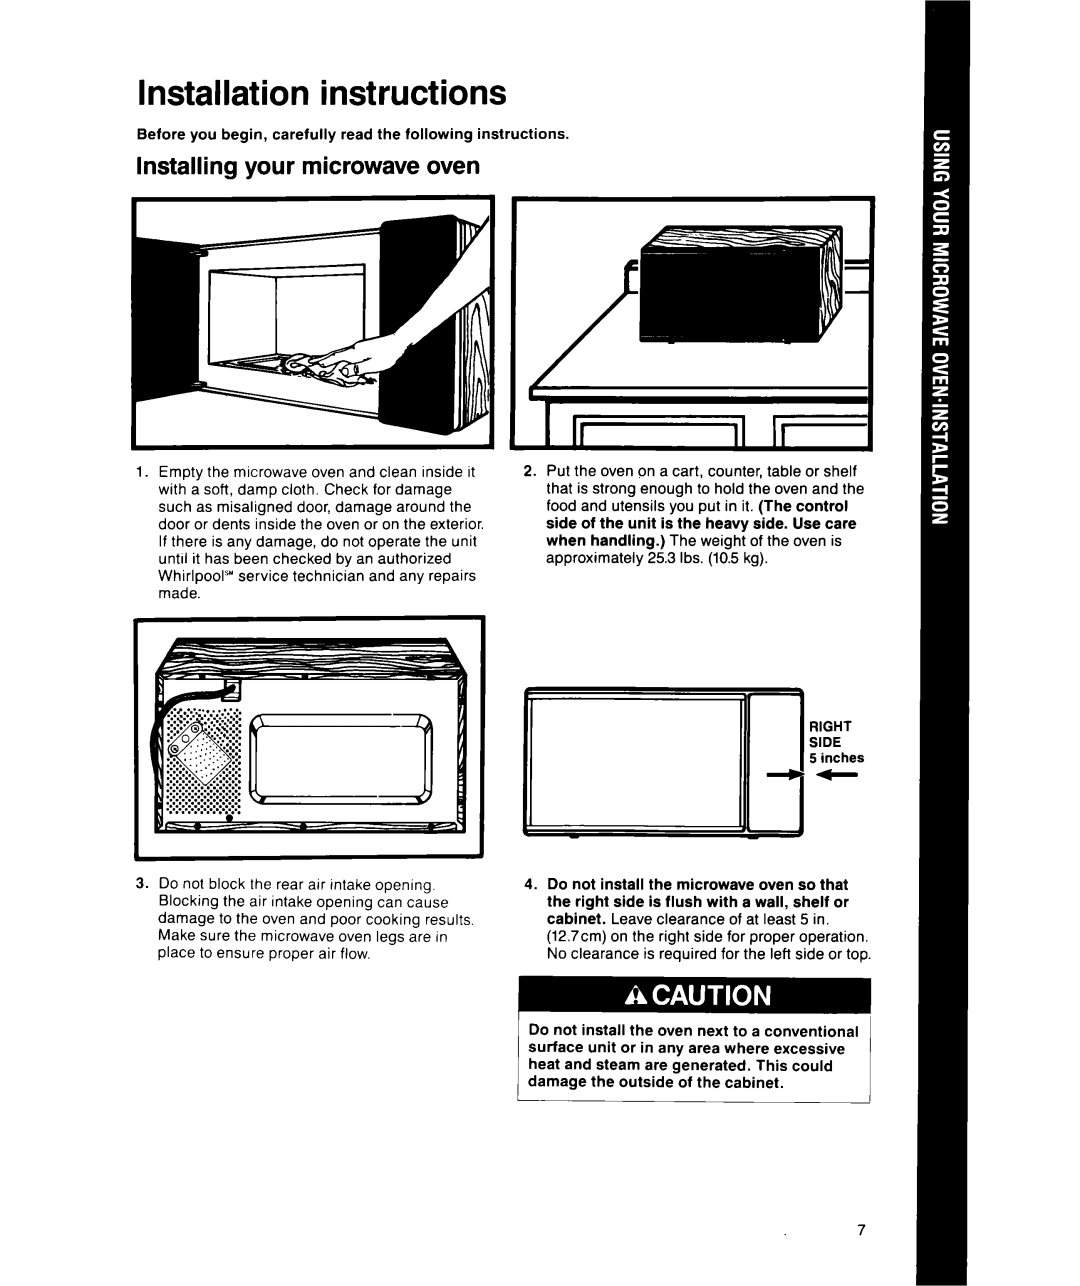 Whirlpool MS1600XW manual Installation instructions, Installing your microwave oven, Ir 11Ir 